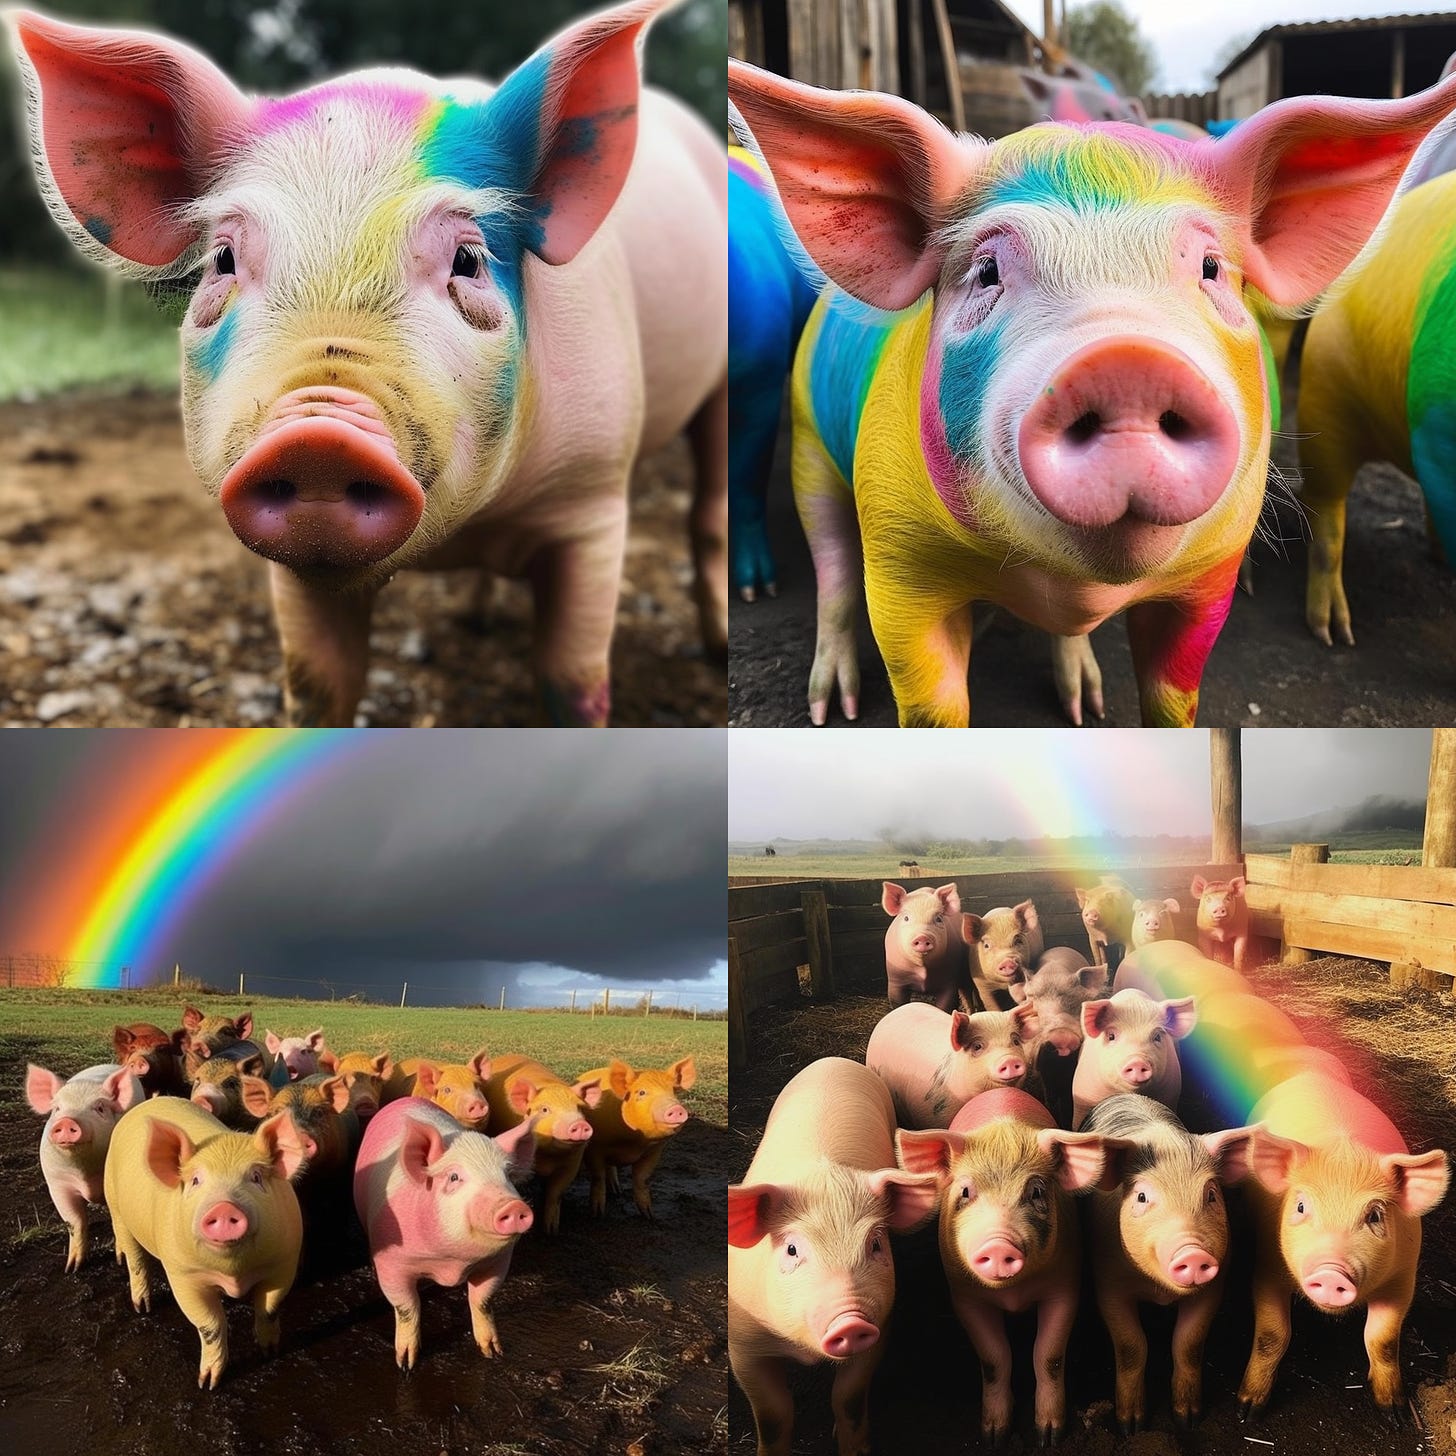 Midjourney V5 results for the pig + rainbow emoji combo. 4-image grid.